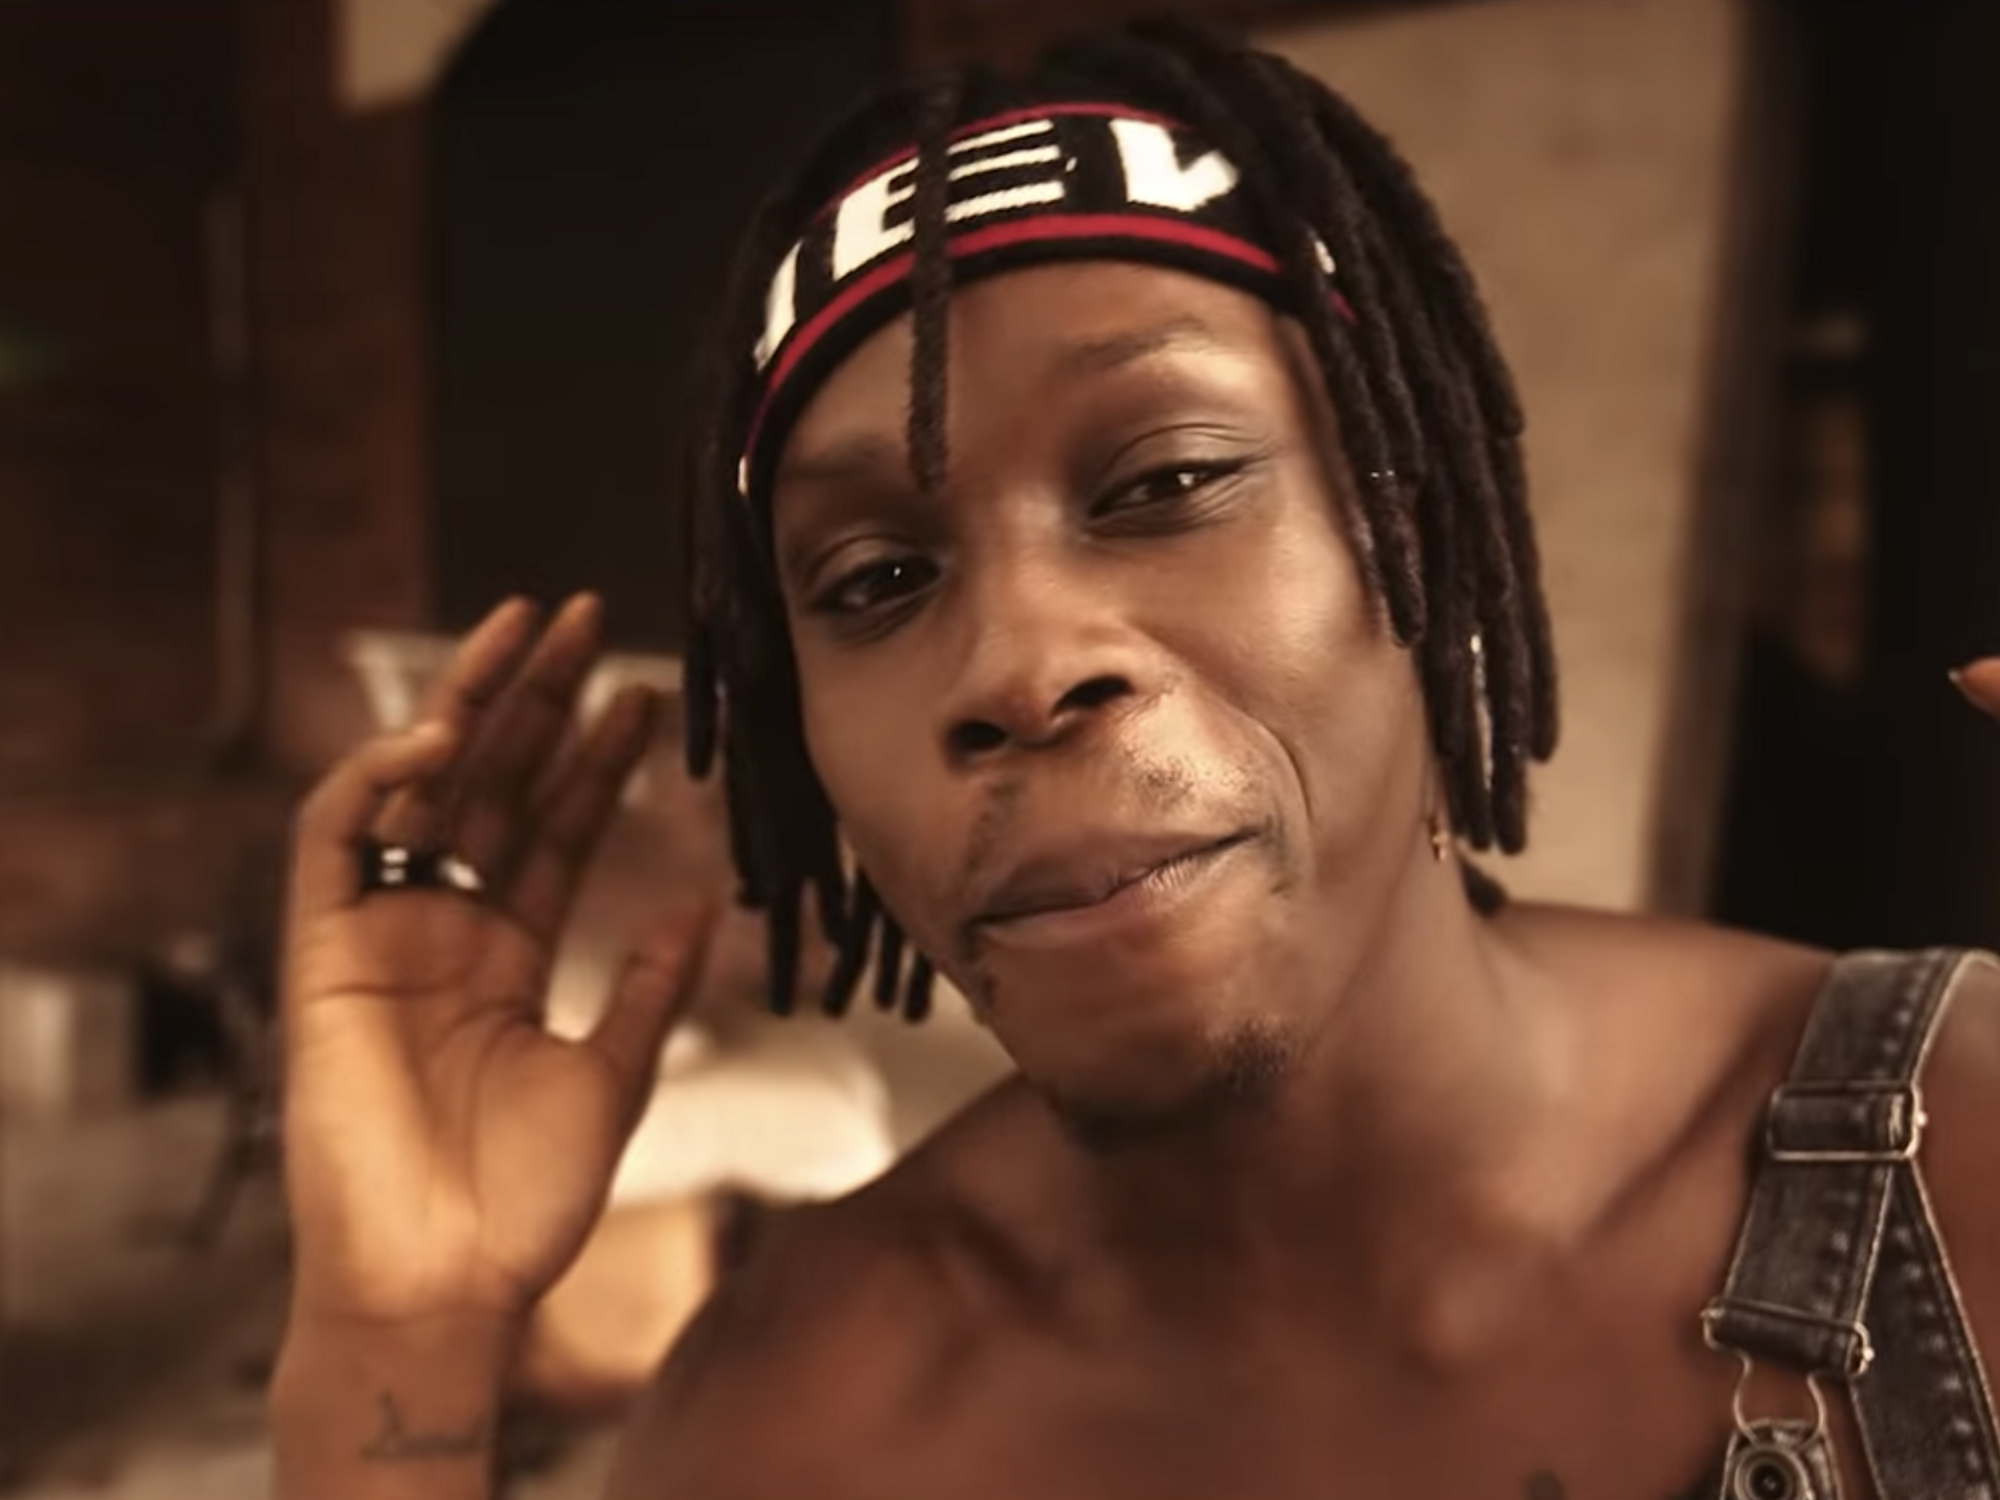 Watch Fireboy DML's New Music Video for 'Need You'